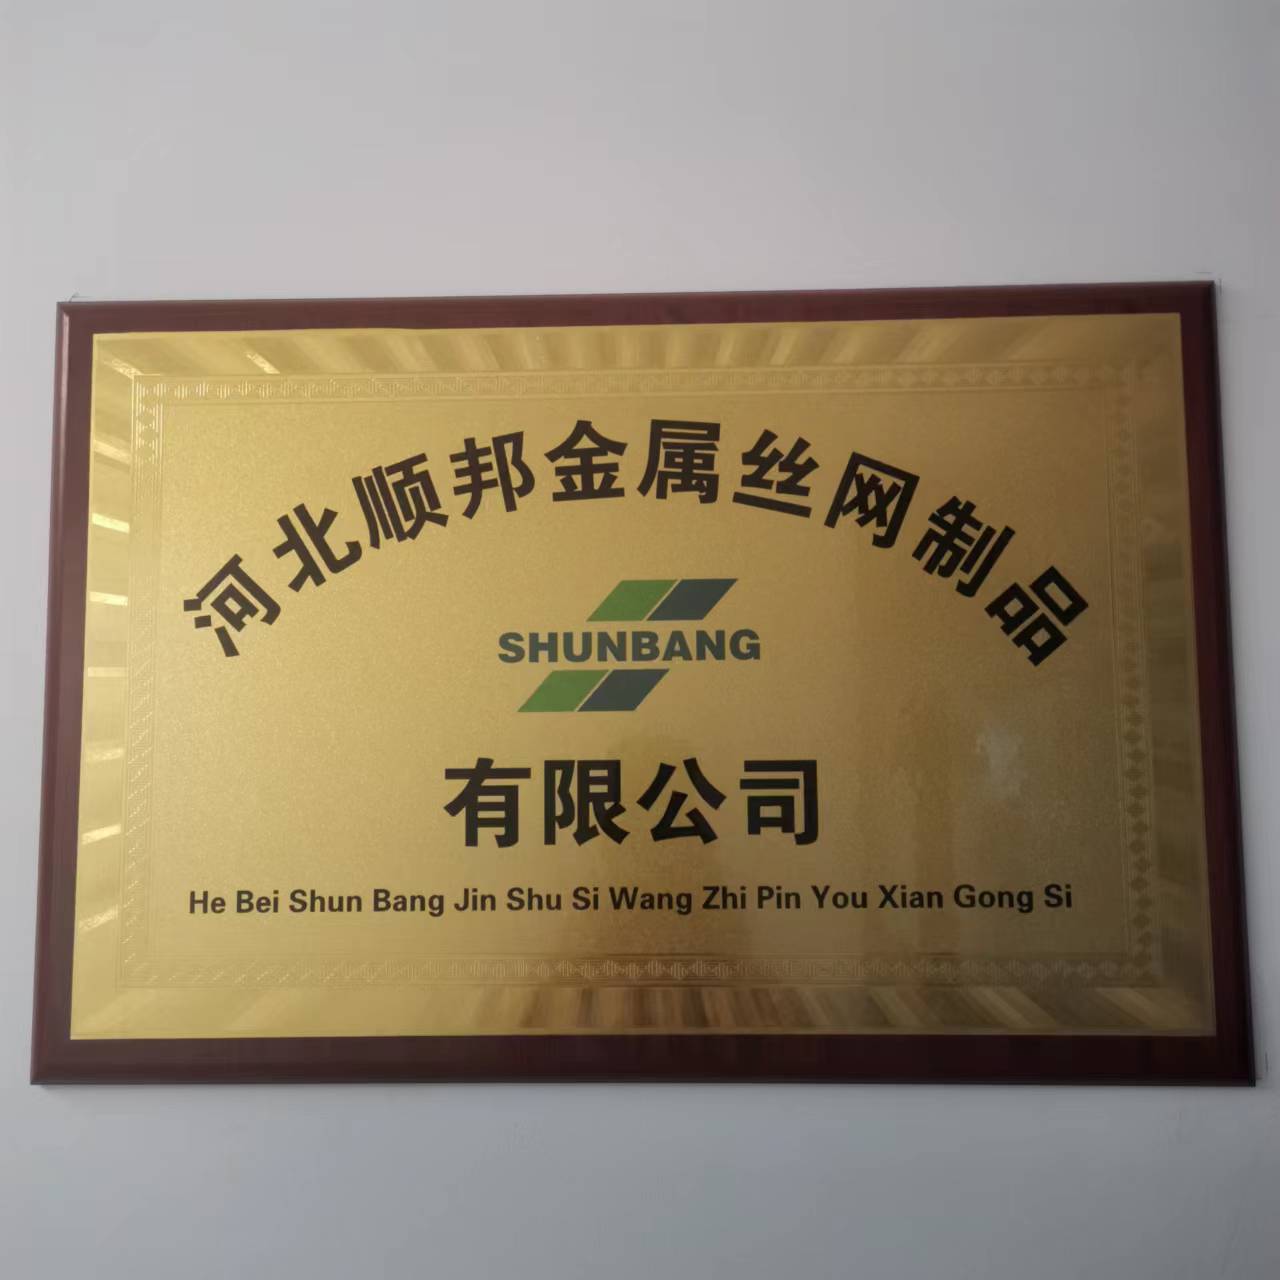 Hebei Shunbang wire mesh Products Co. LTD